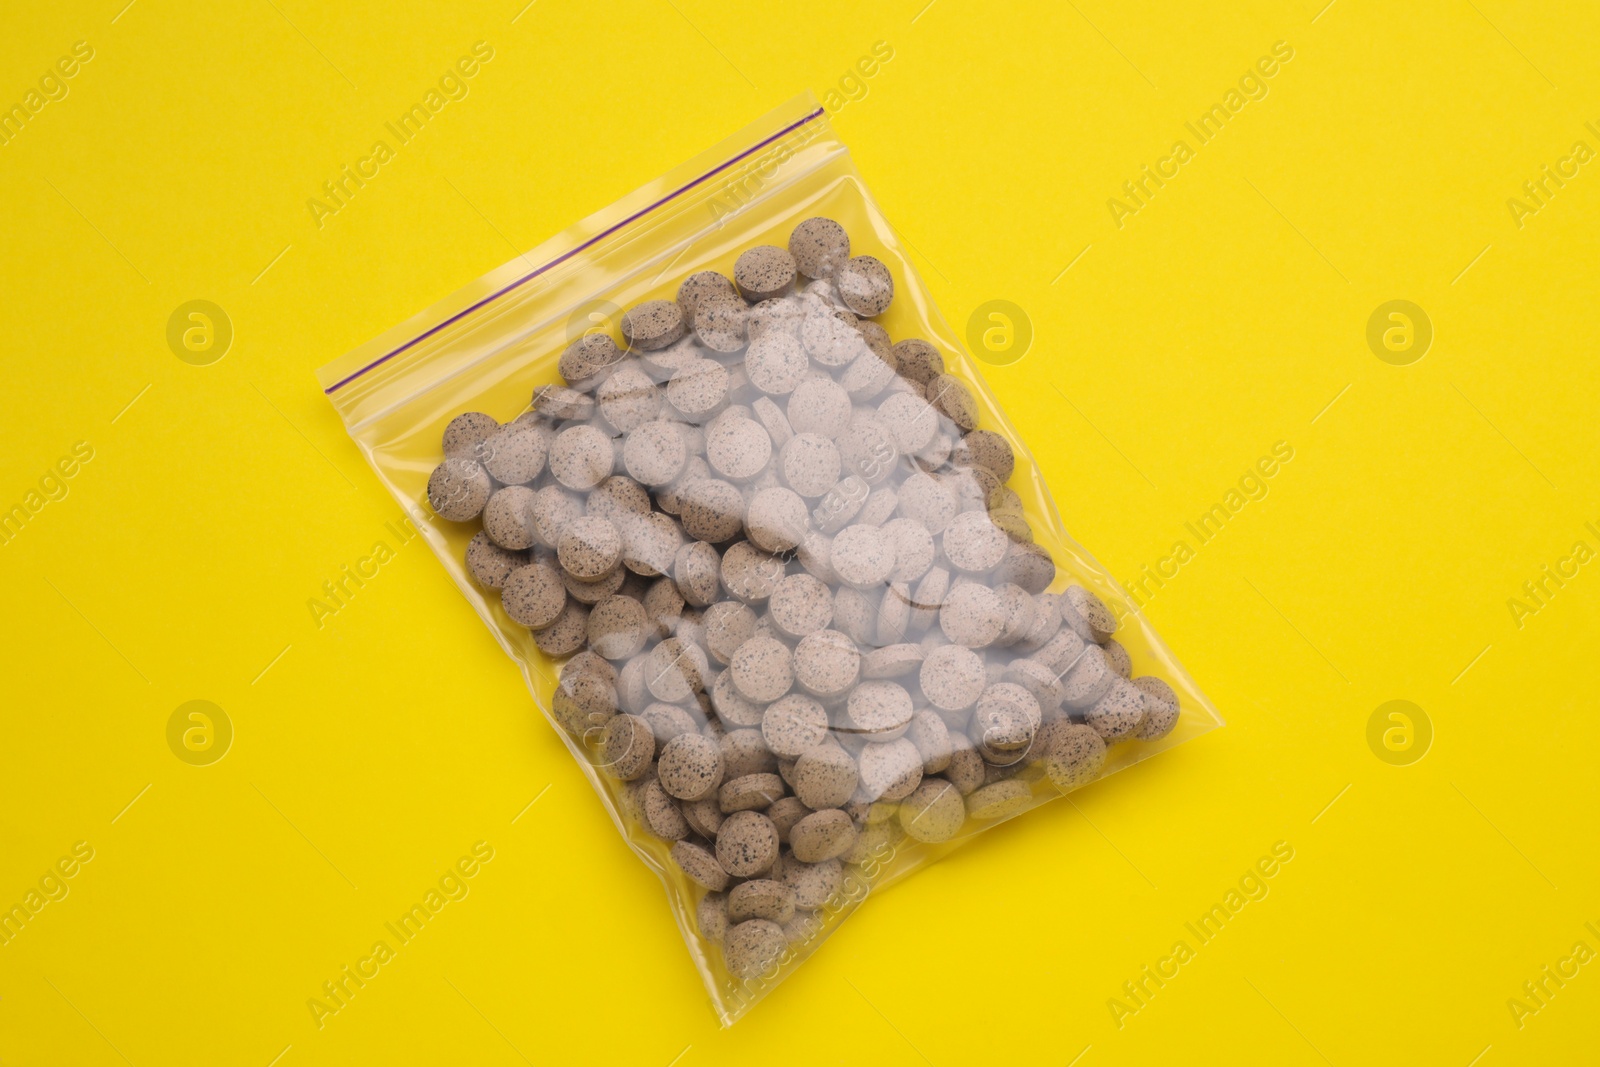 Photo of Beer yeast pills on yellow background, top view